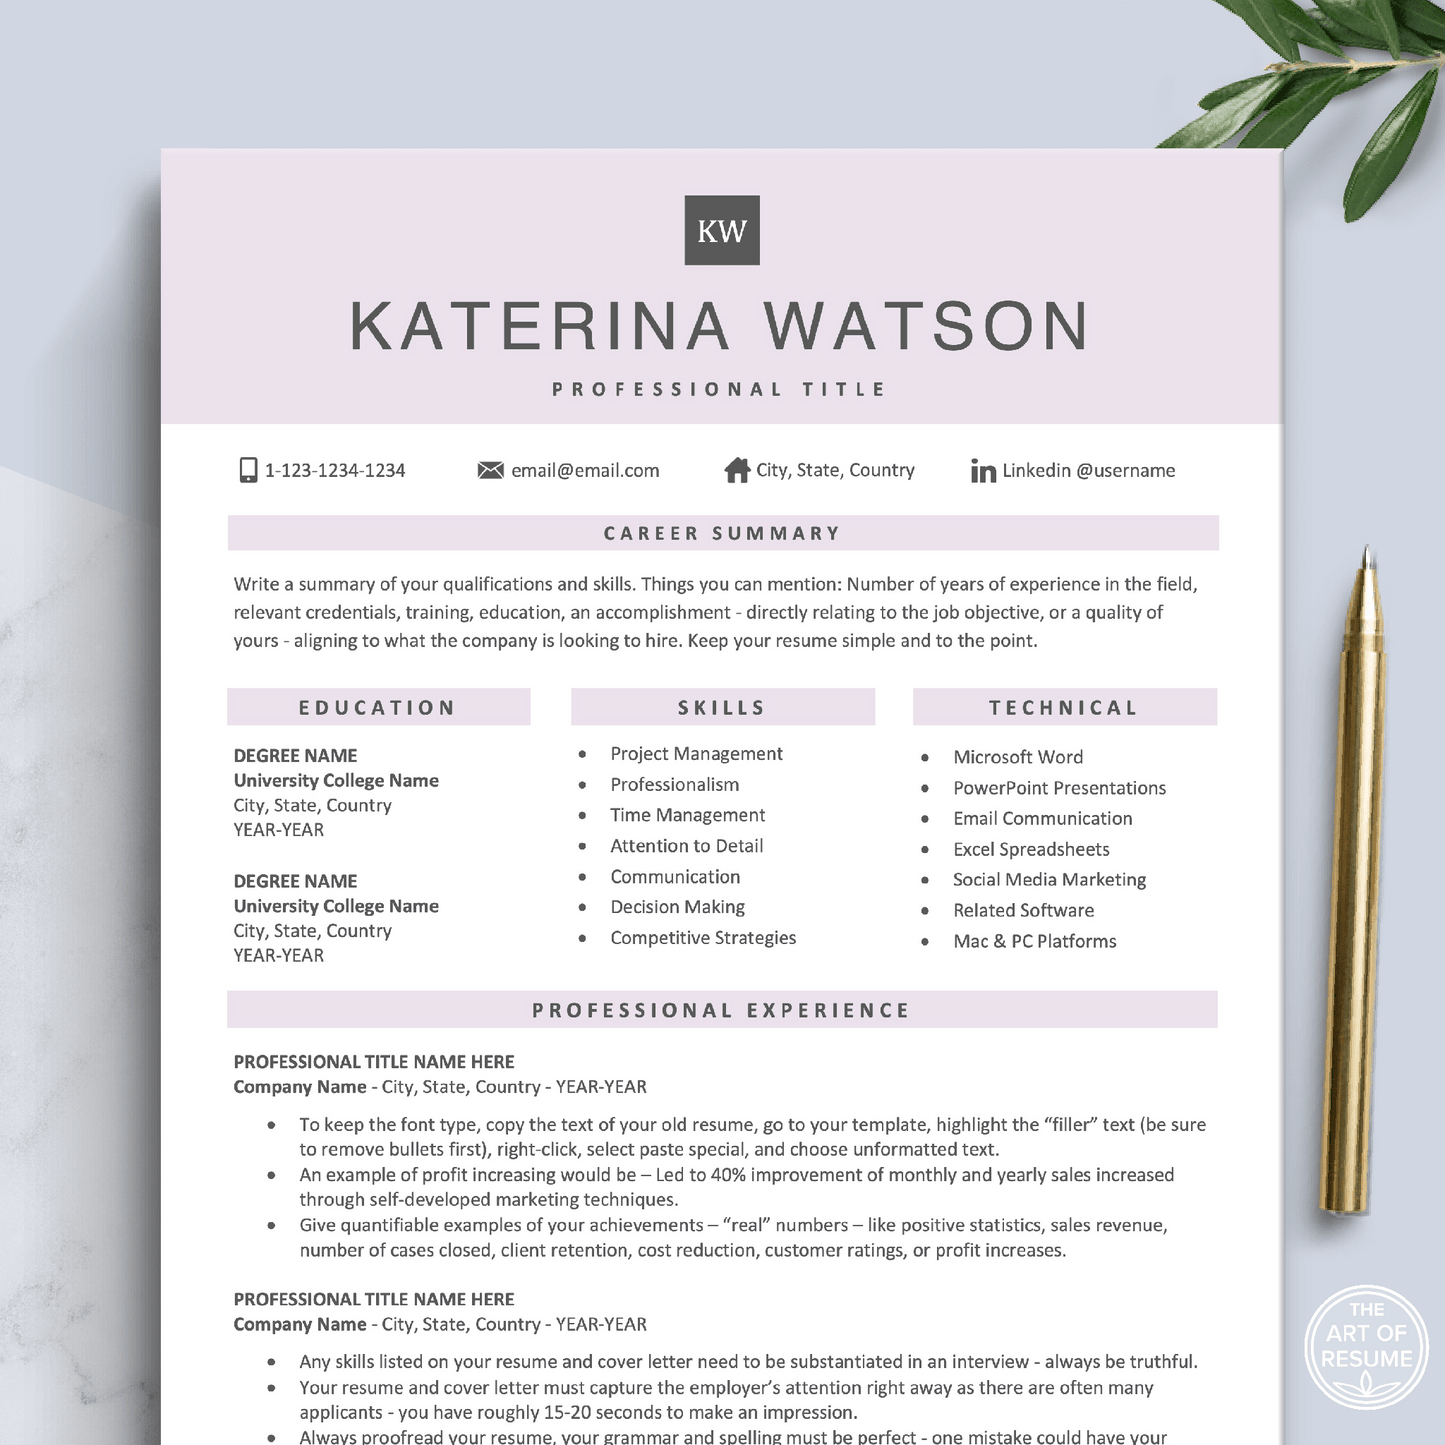 The Art of Resume Templates |  Professional Rose Pink Resume CV Template | Curriculum Vitae for Apple Pages, Microsoft Word, Mac, PC